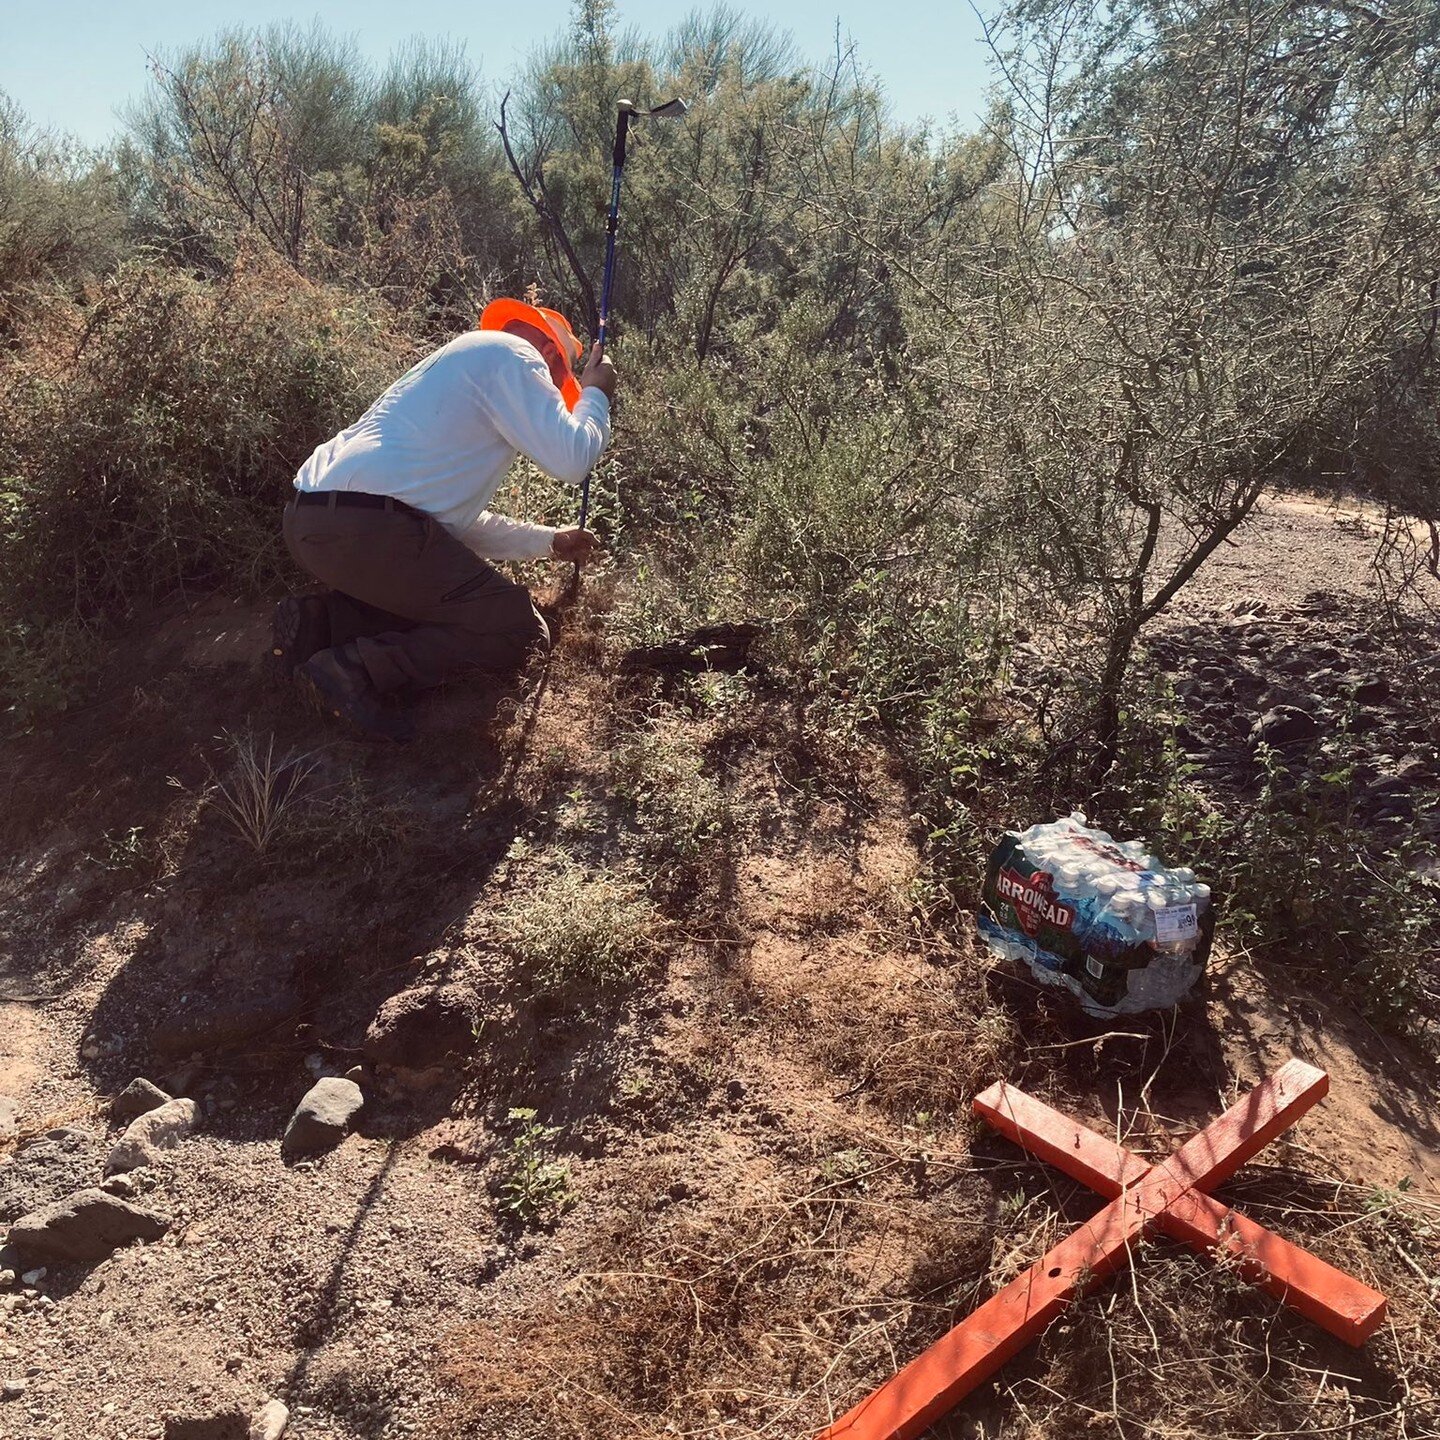 Acts of care in the desert. &ldquo;It&rsquo;s a slow motion genocide.&rdquo; James Holeman @battalionsearchandrescue 

Deaths at the Arizona-Mexico border estimated to be highest ever recorded in 2021 and surveillance technology is pushing people int